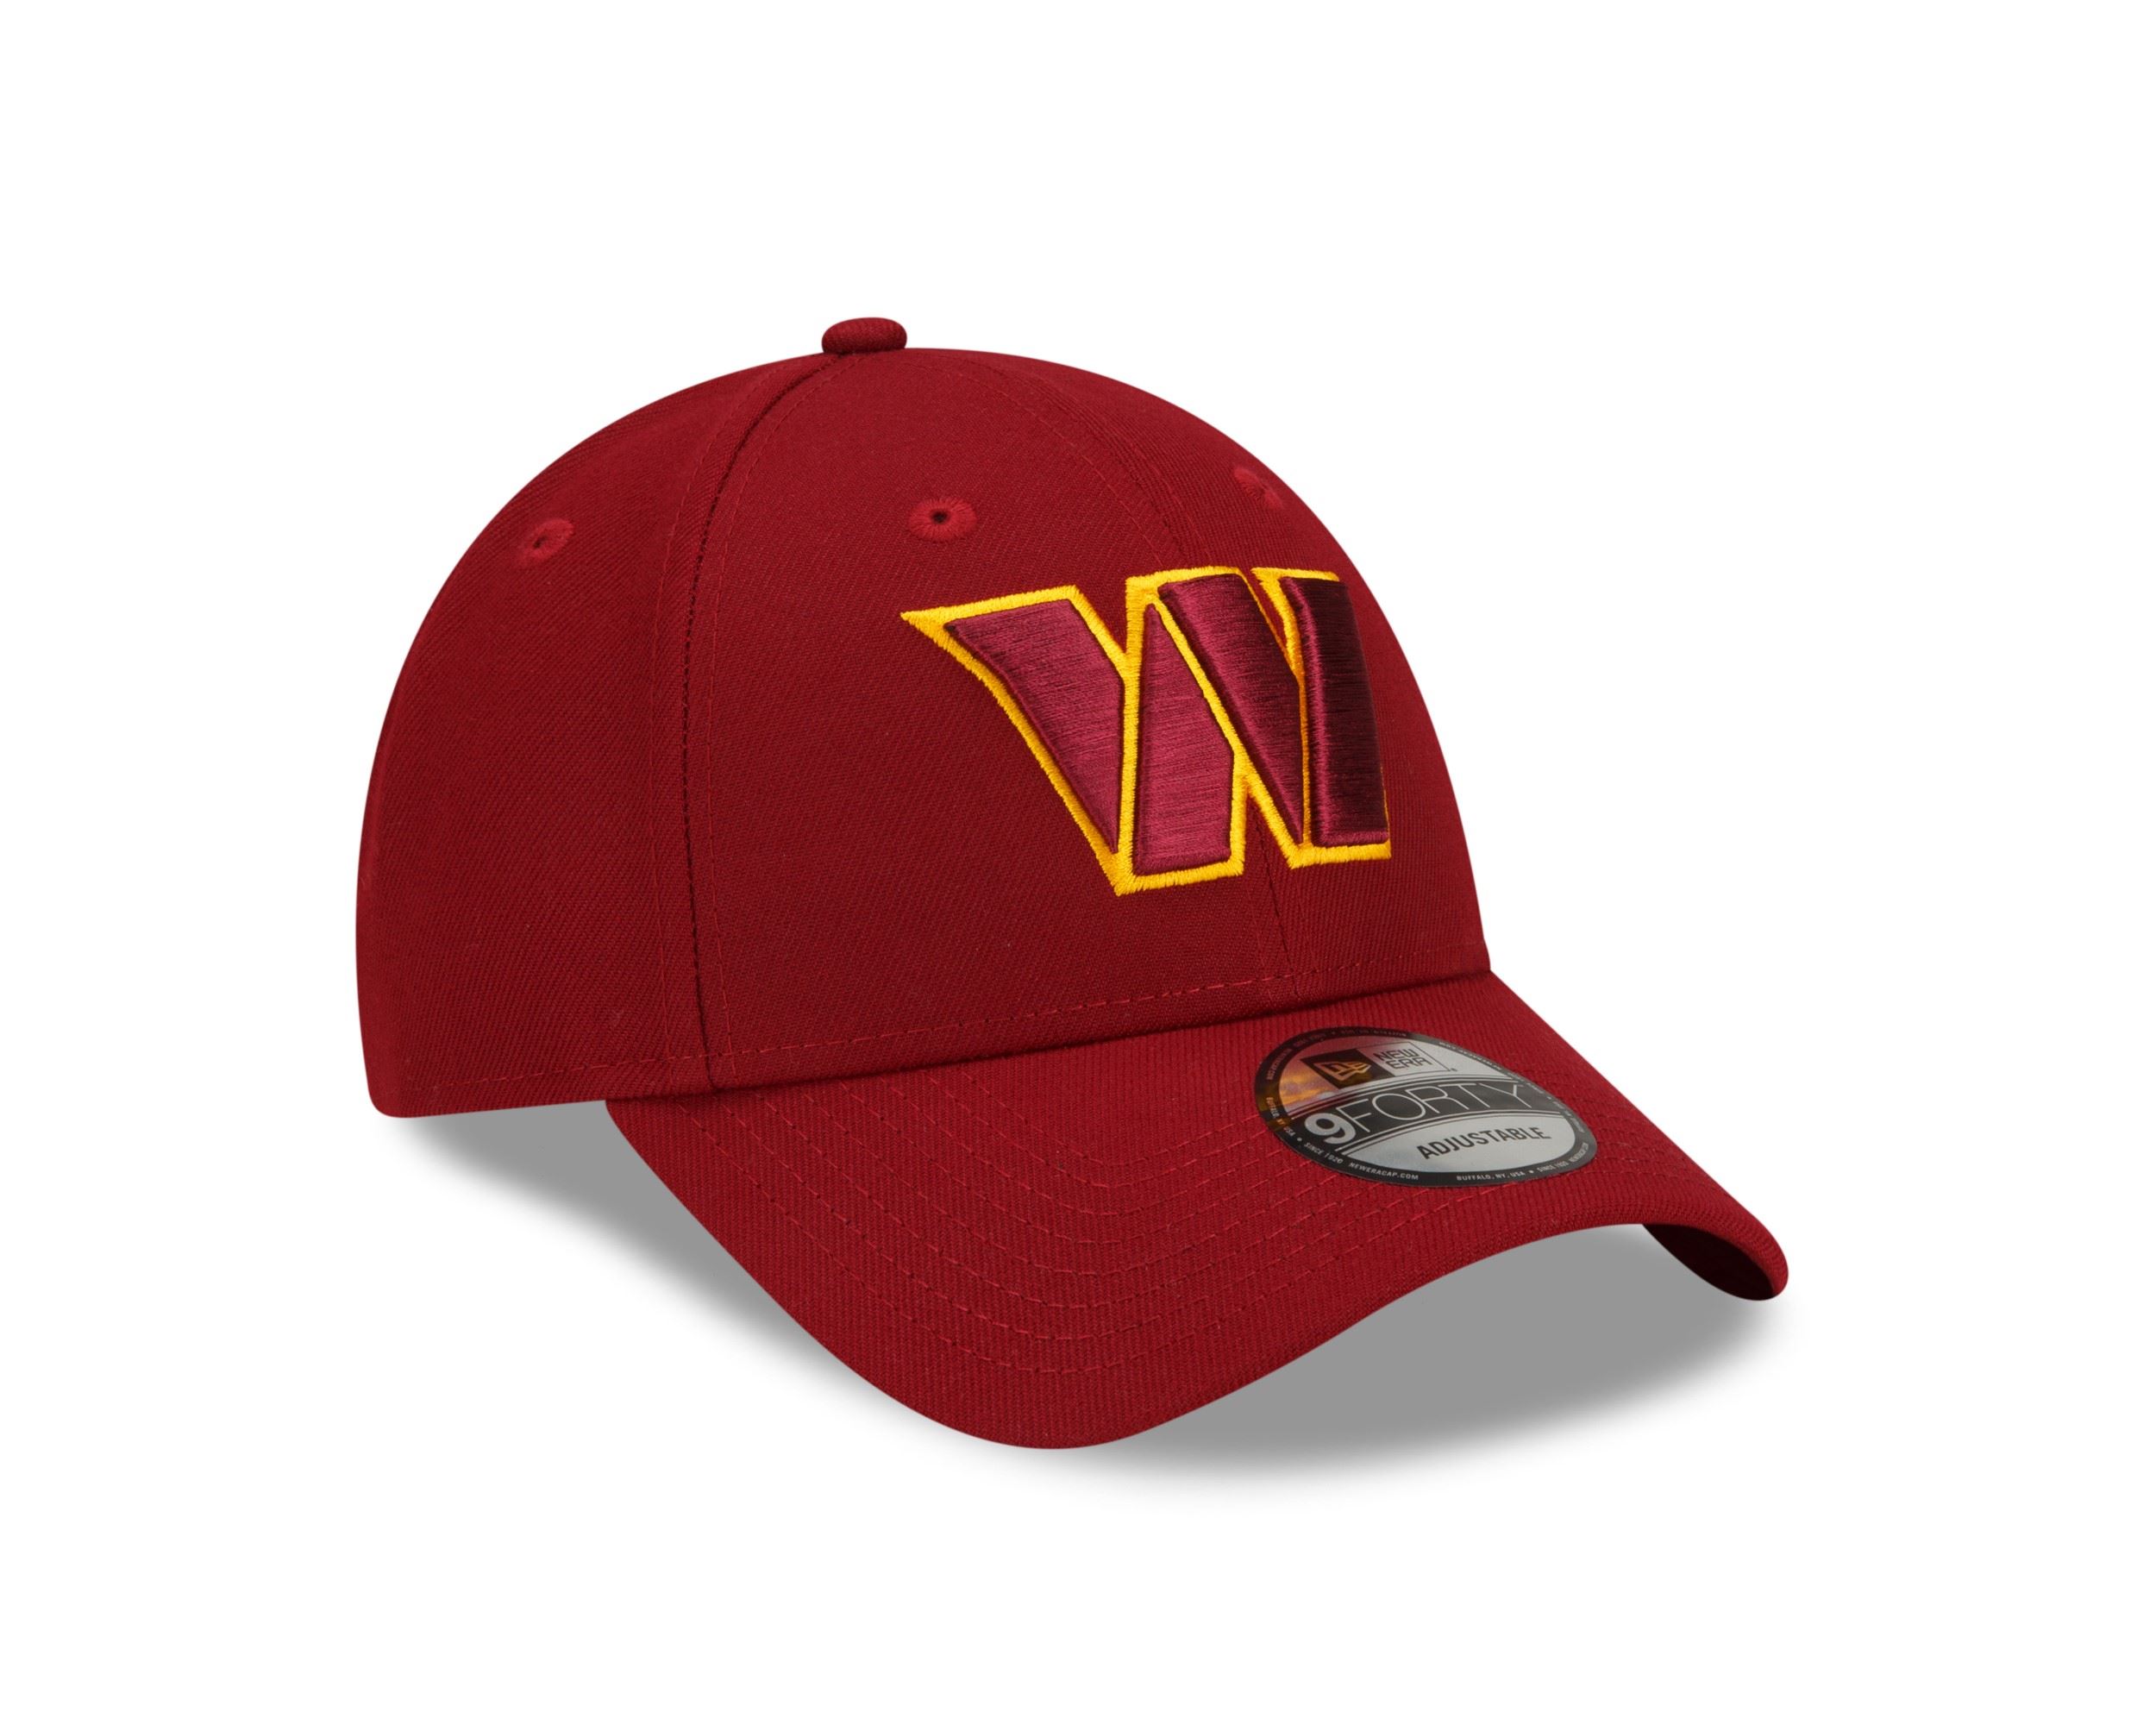 Washington Commanders NFL The League Red 9Forty Adjustable Cap New Era